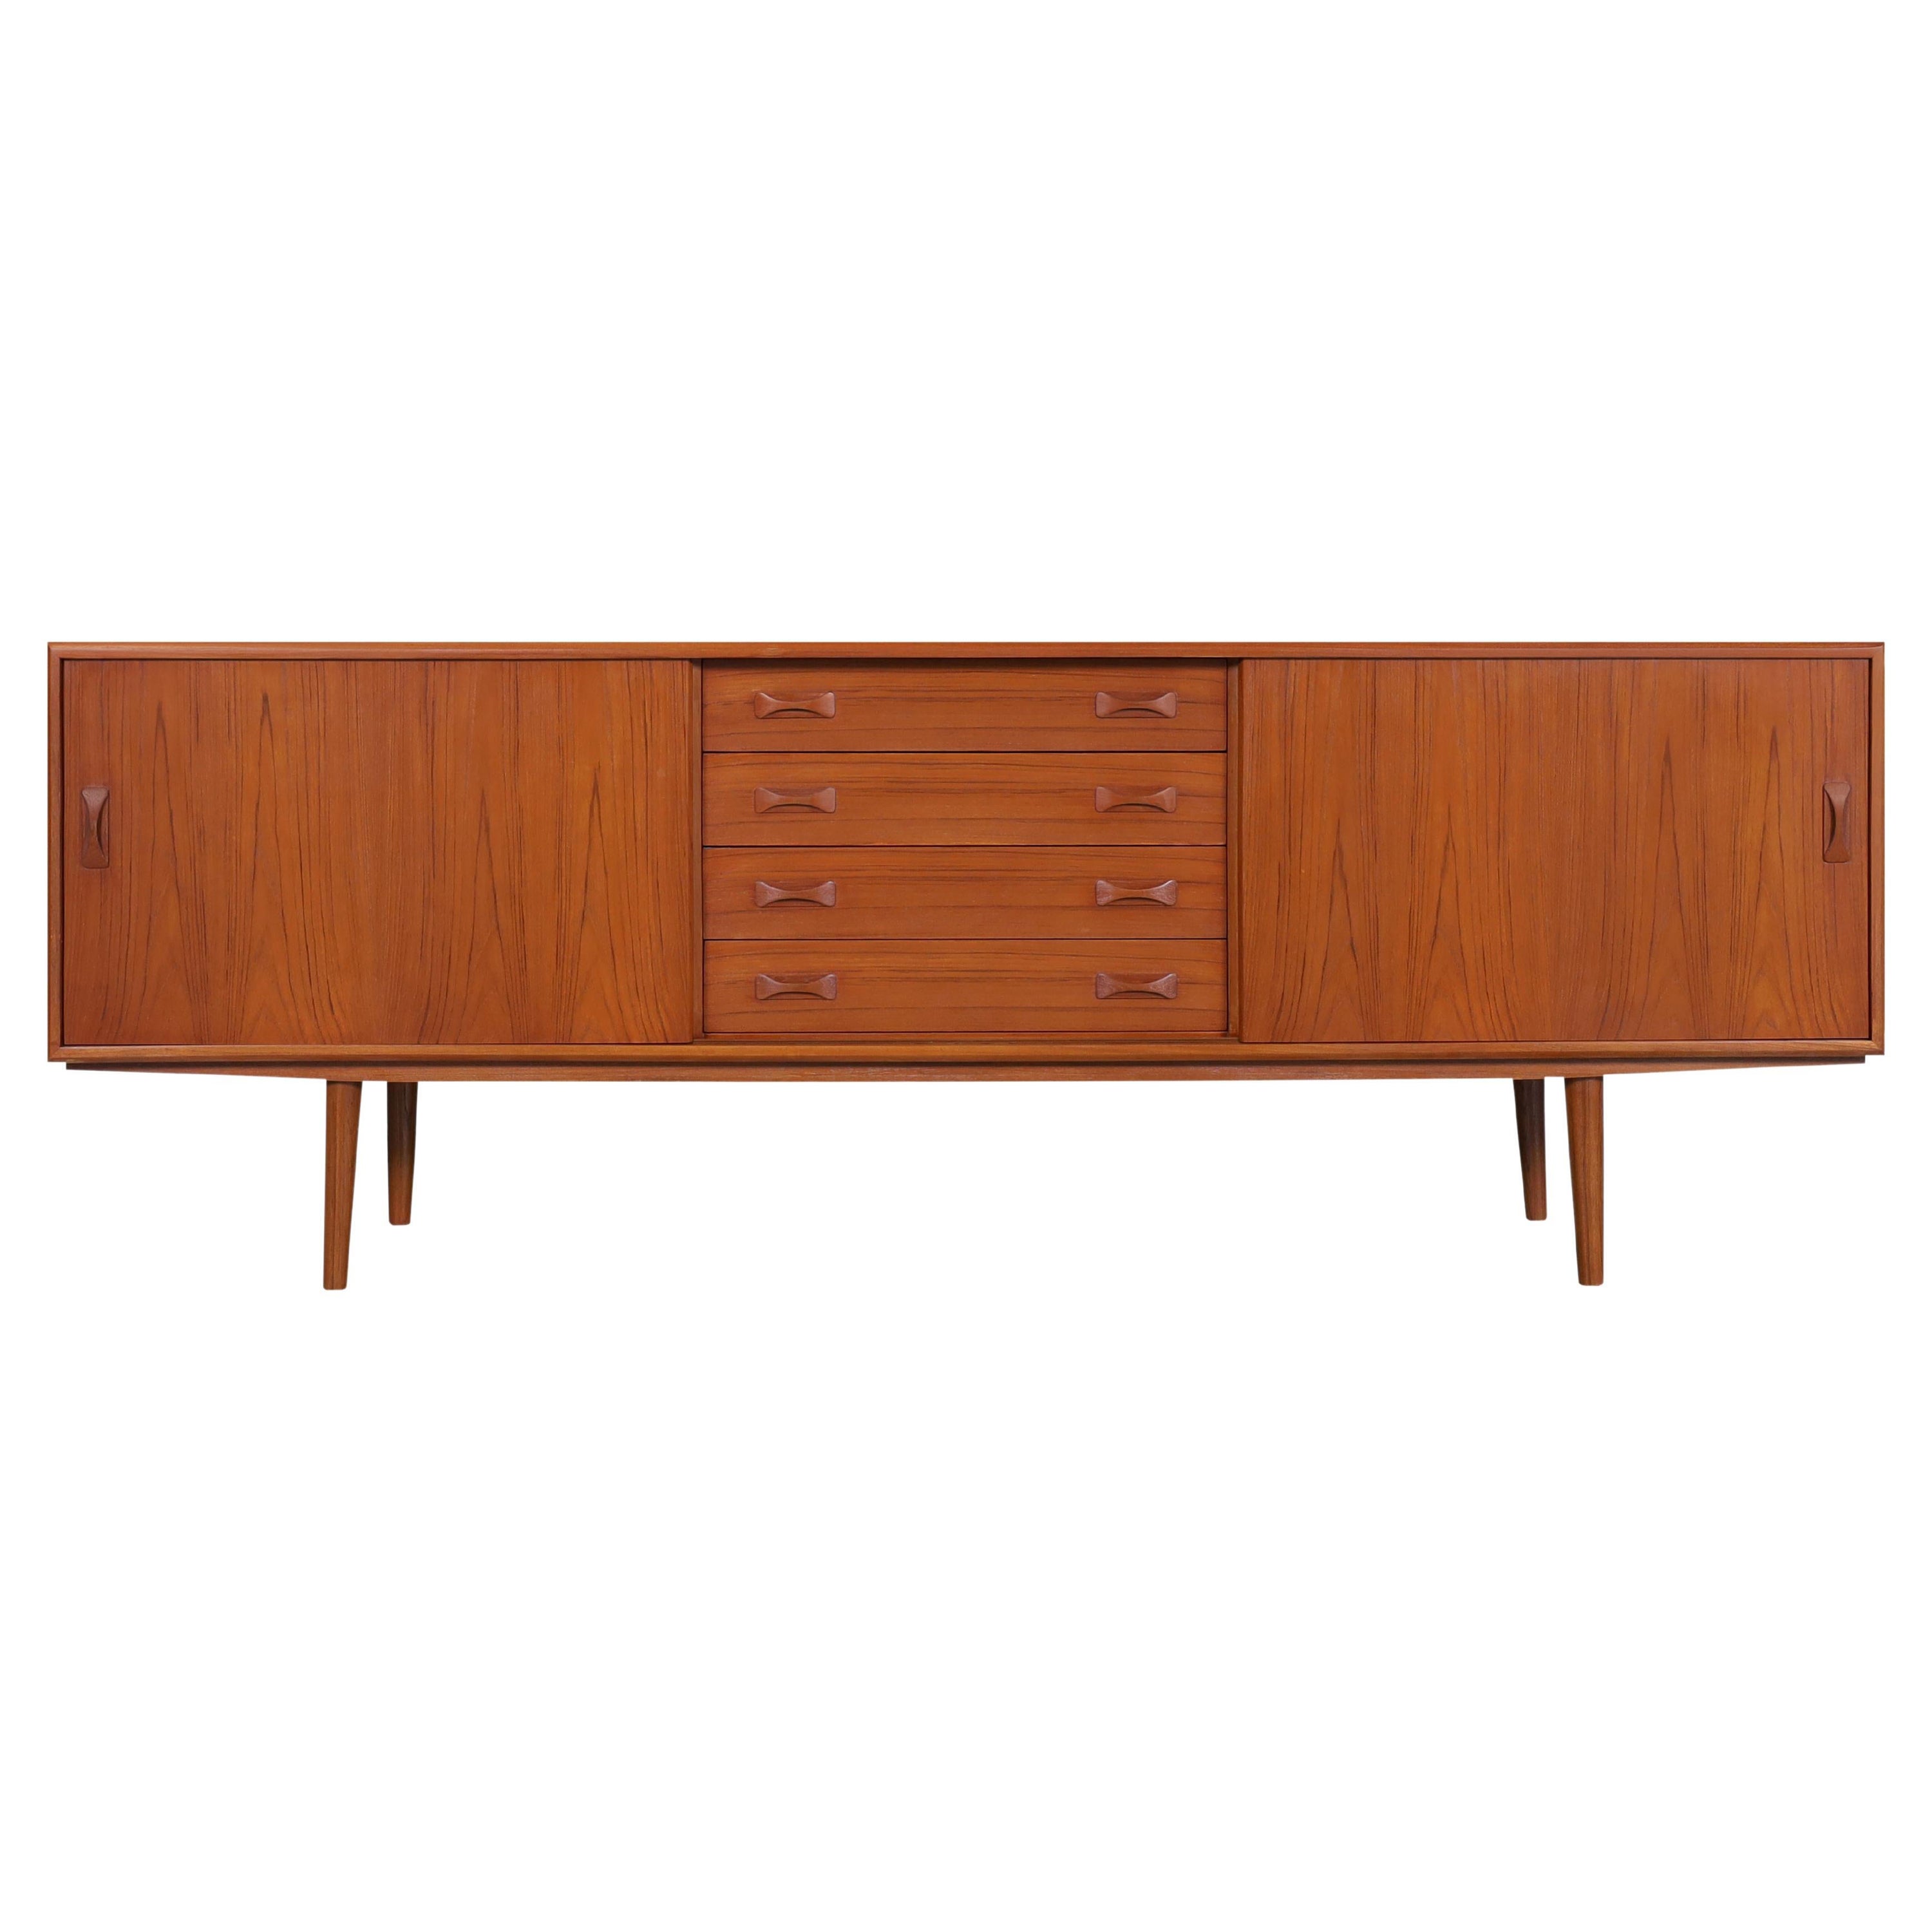 Danish Modern Teak Credenza by Clausen and Son For Sale